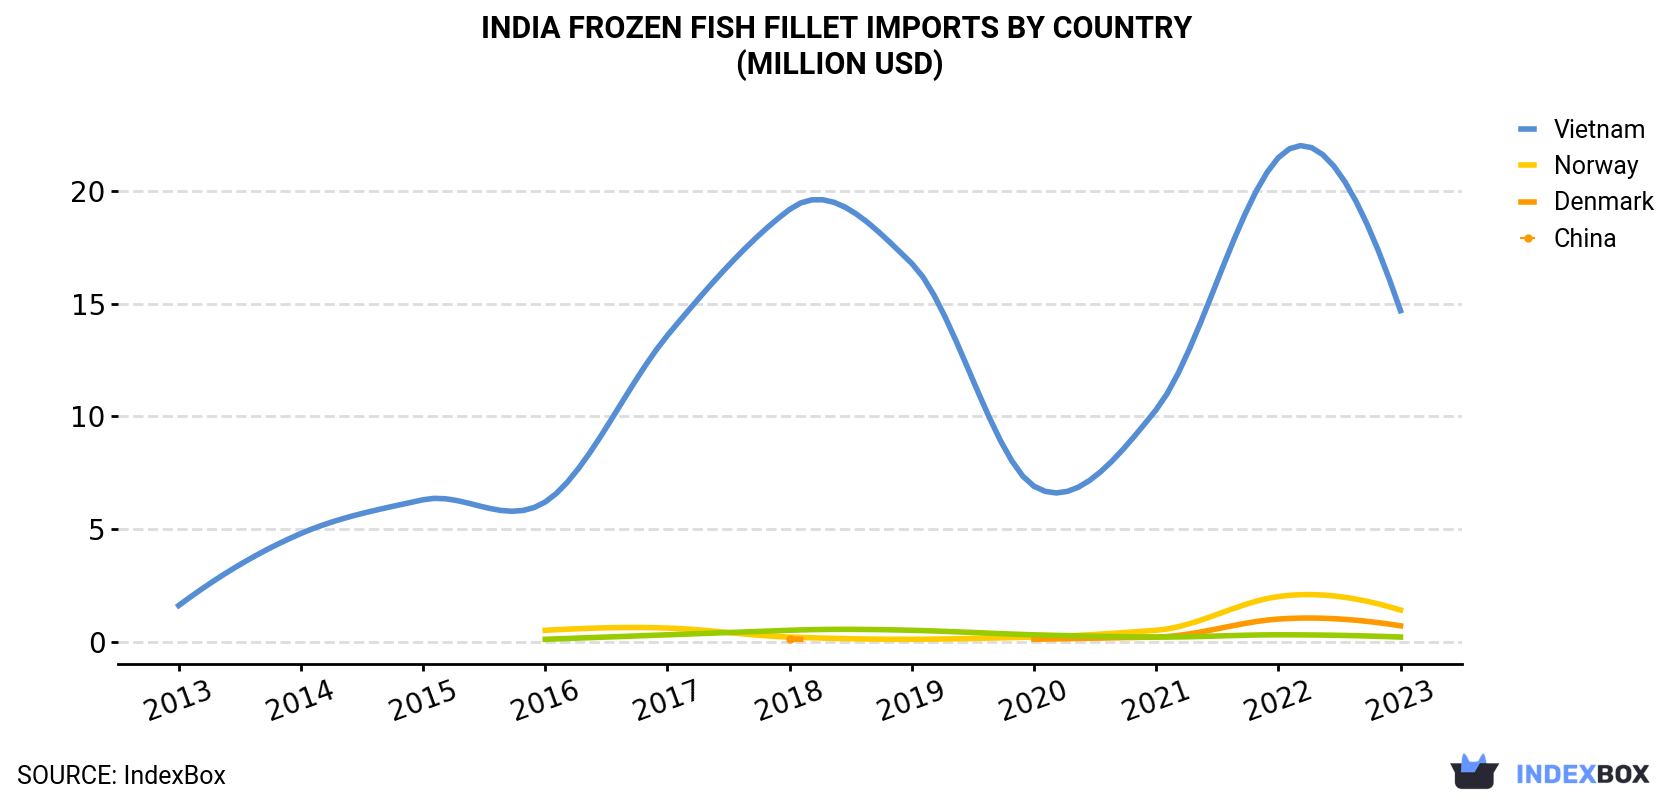 India Frozen Fish Fillet Imports By Country (Million USD)